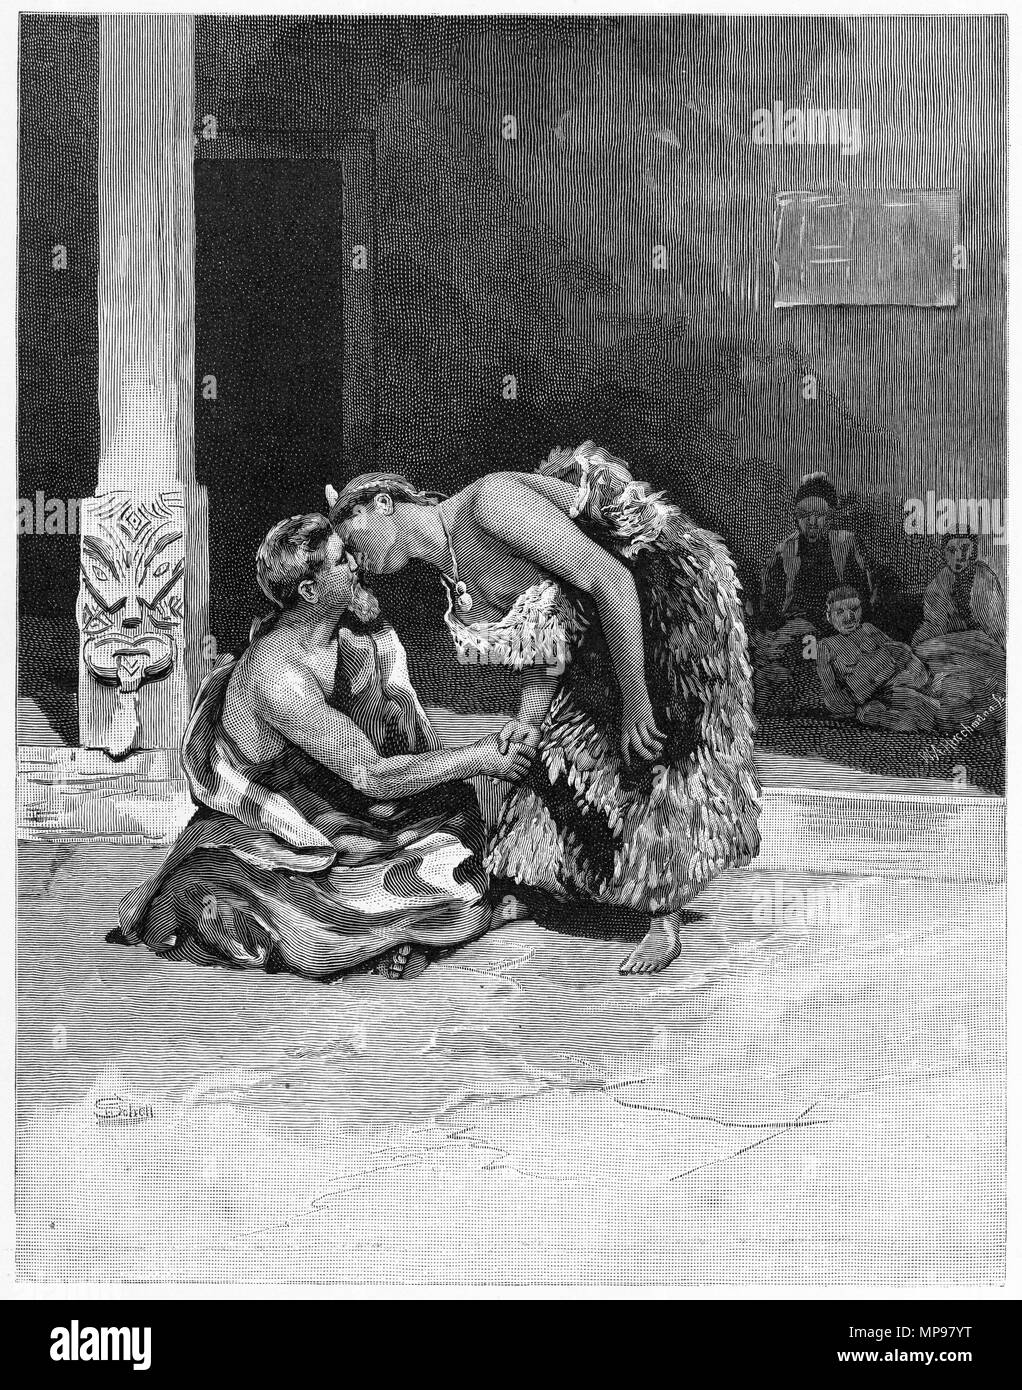 Engraving of a traditional Maori greeting, the rubbing of noses, New Zealand. From the Picturesque Atlas of Australasia Vol 3, 1886 Stock Photo